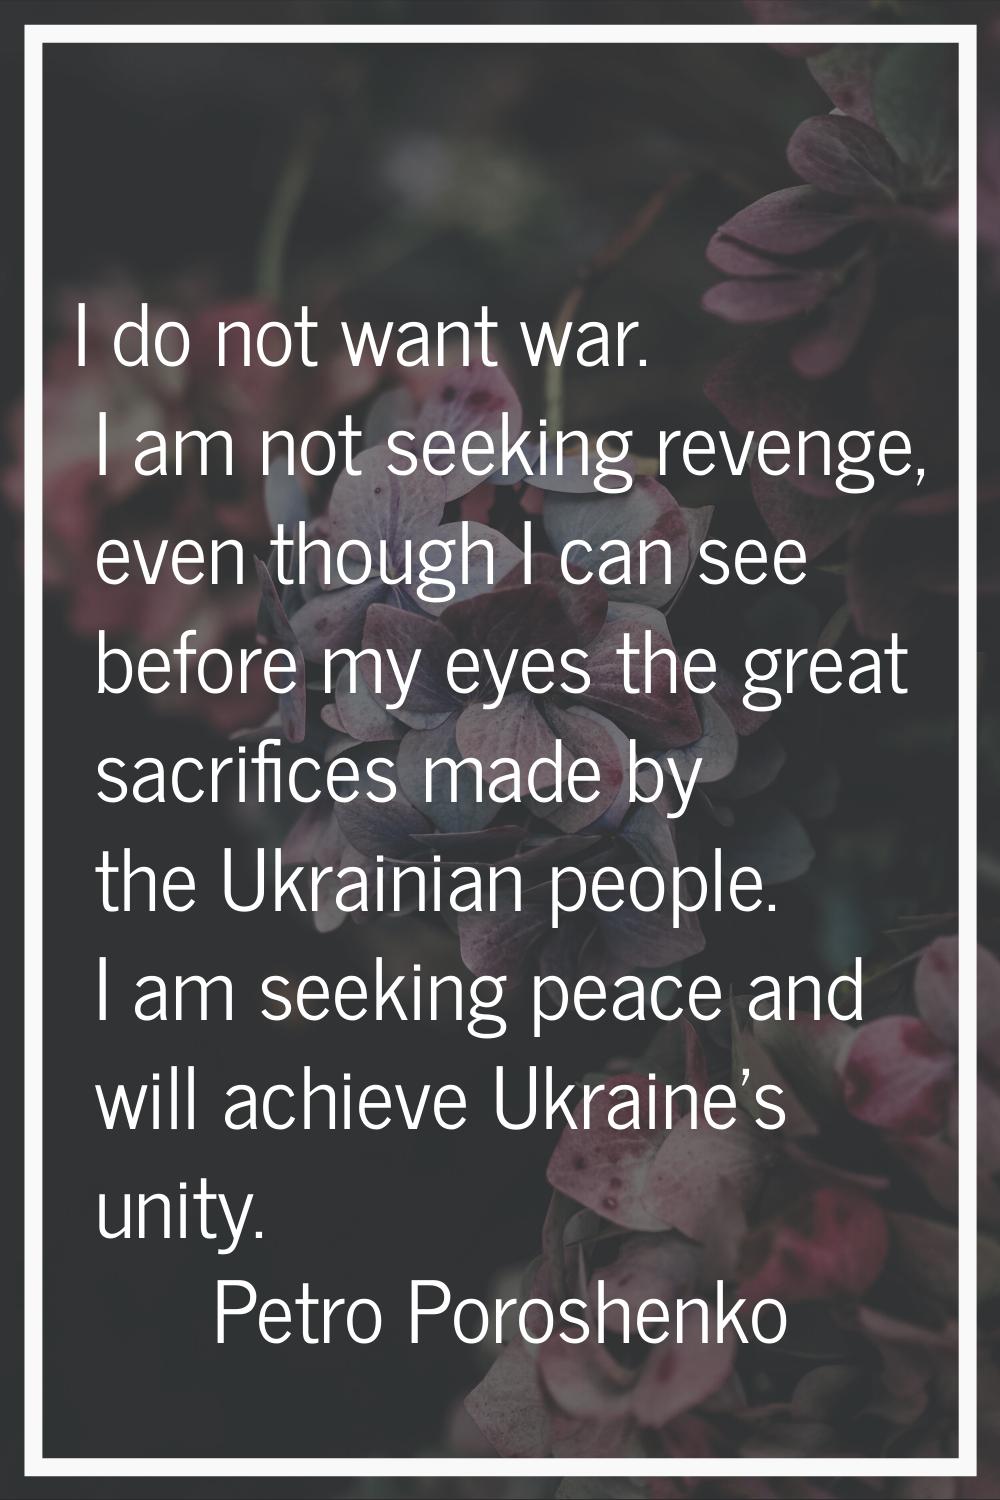 I do not want war. I am not seeking revenge, even though I can see before my eyes the great sacrifi